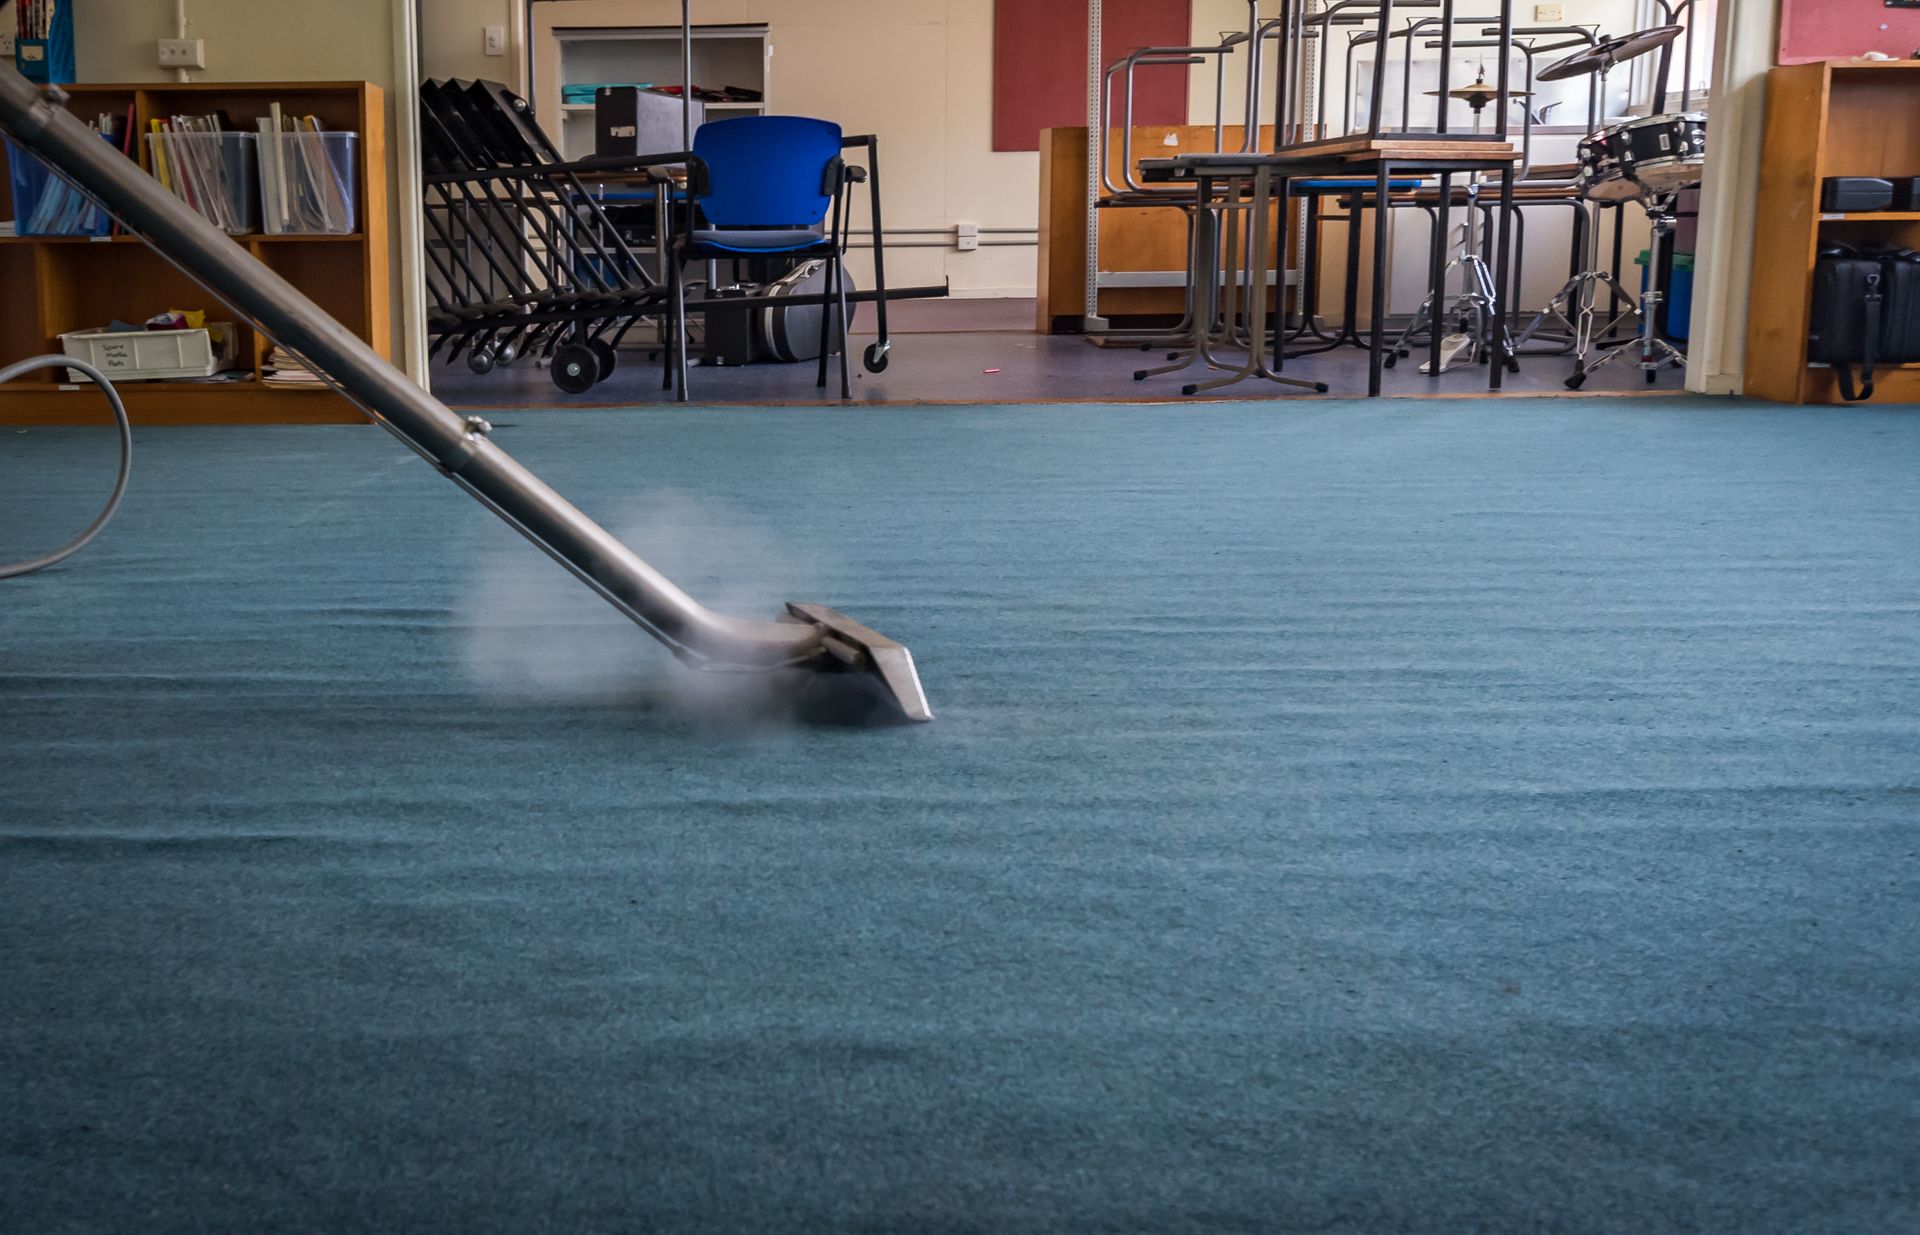 a vacuum cleaner is cleaning a blue carpet in a classroom